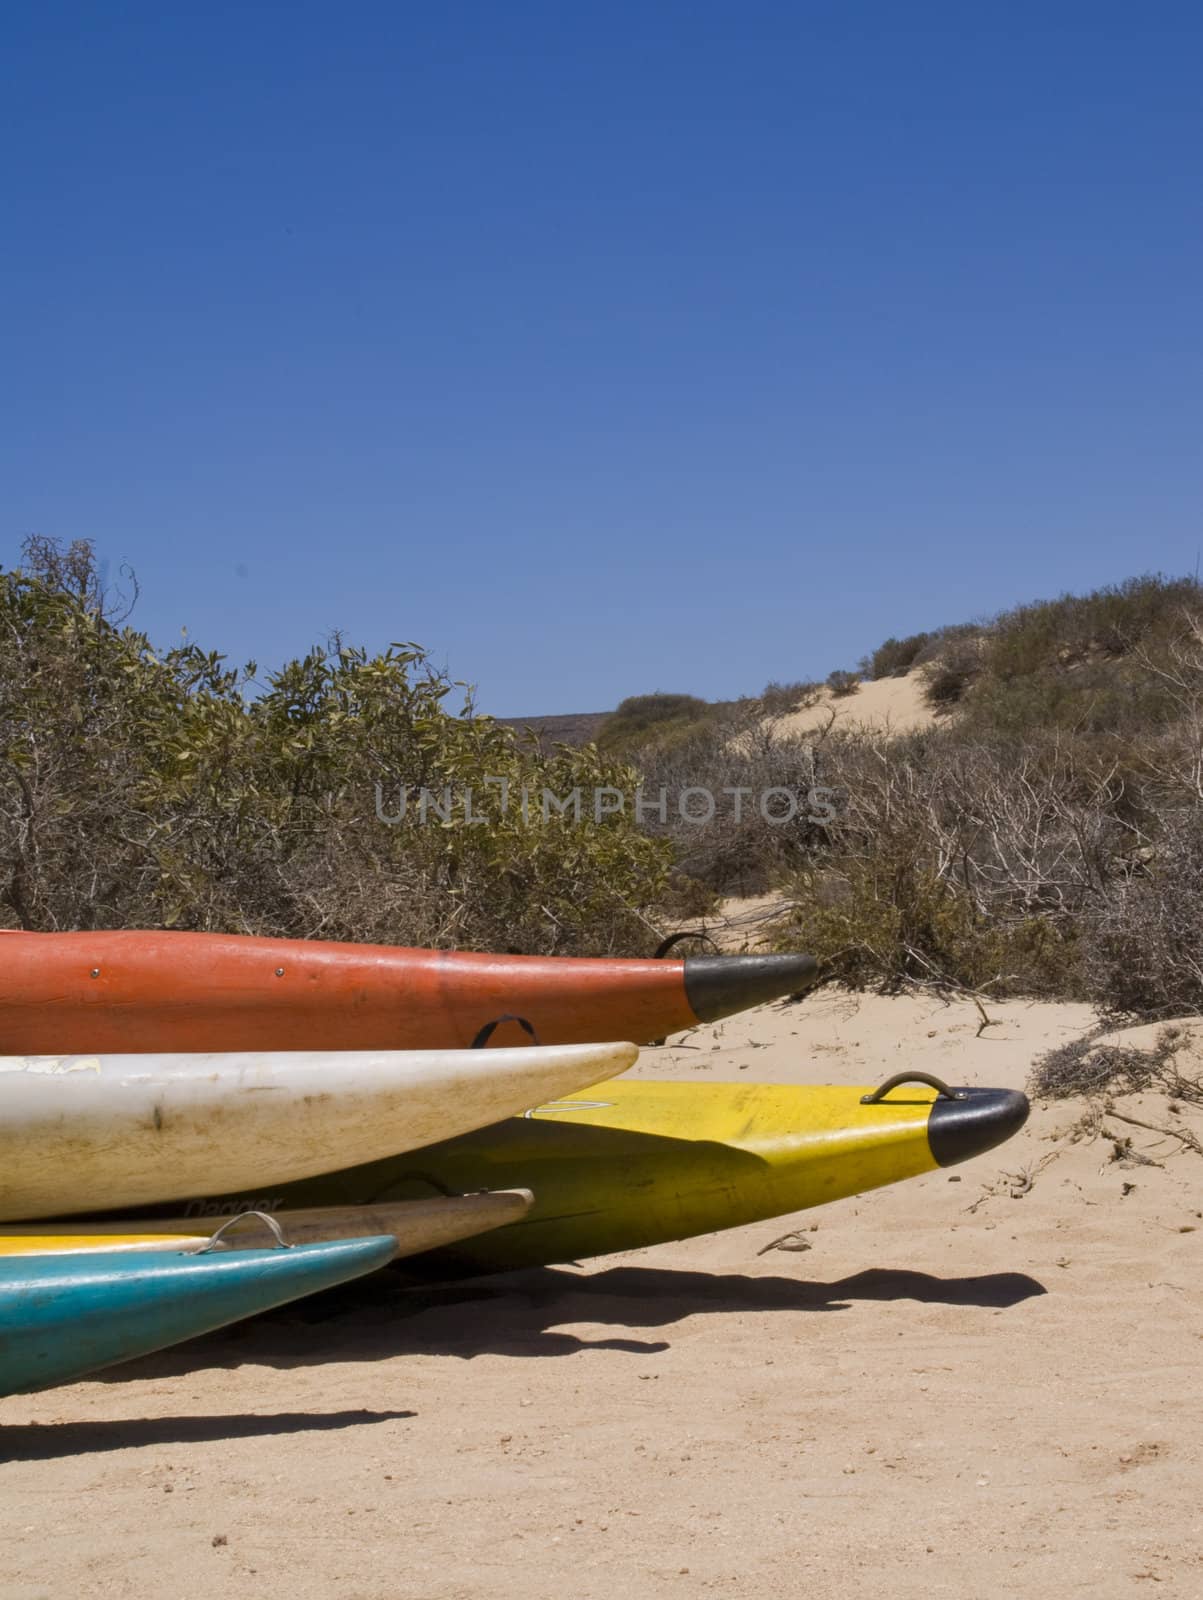 A colorful stack of canoes in the dunes under a bright sky.